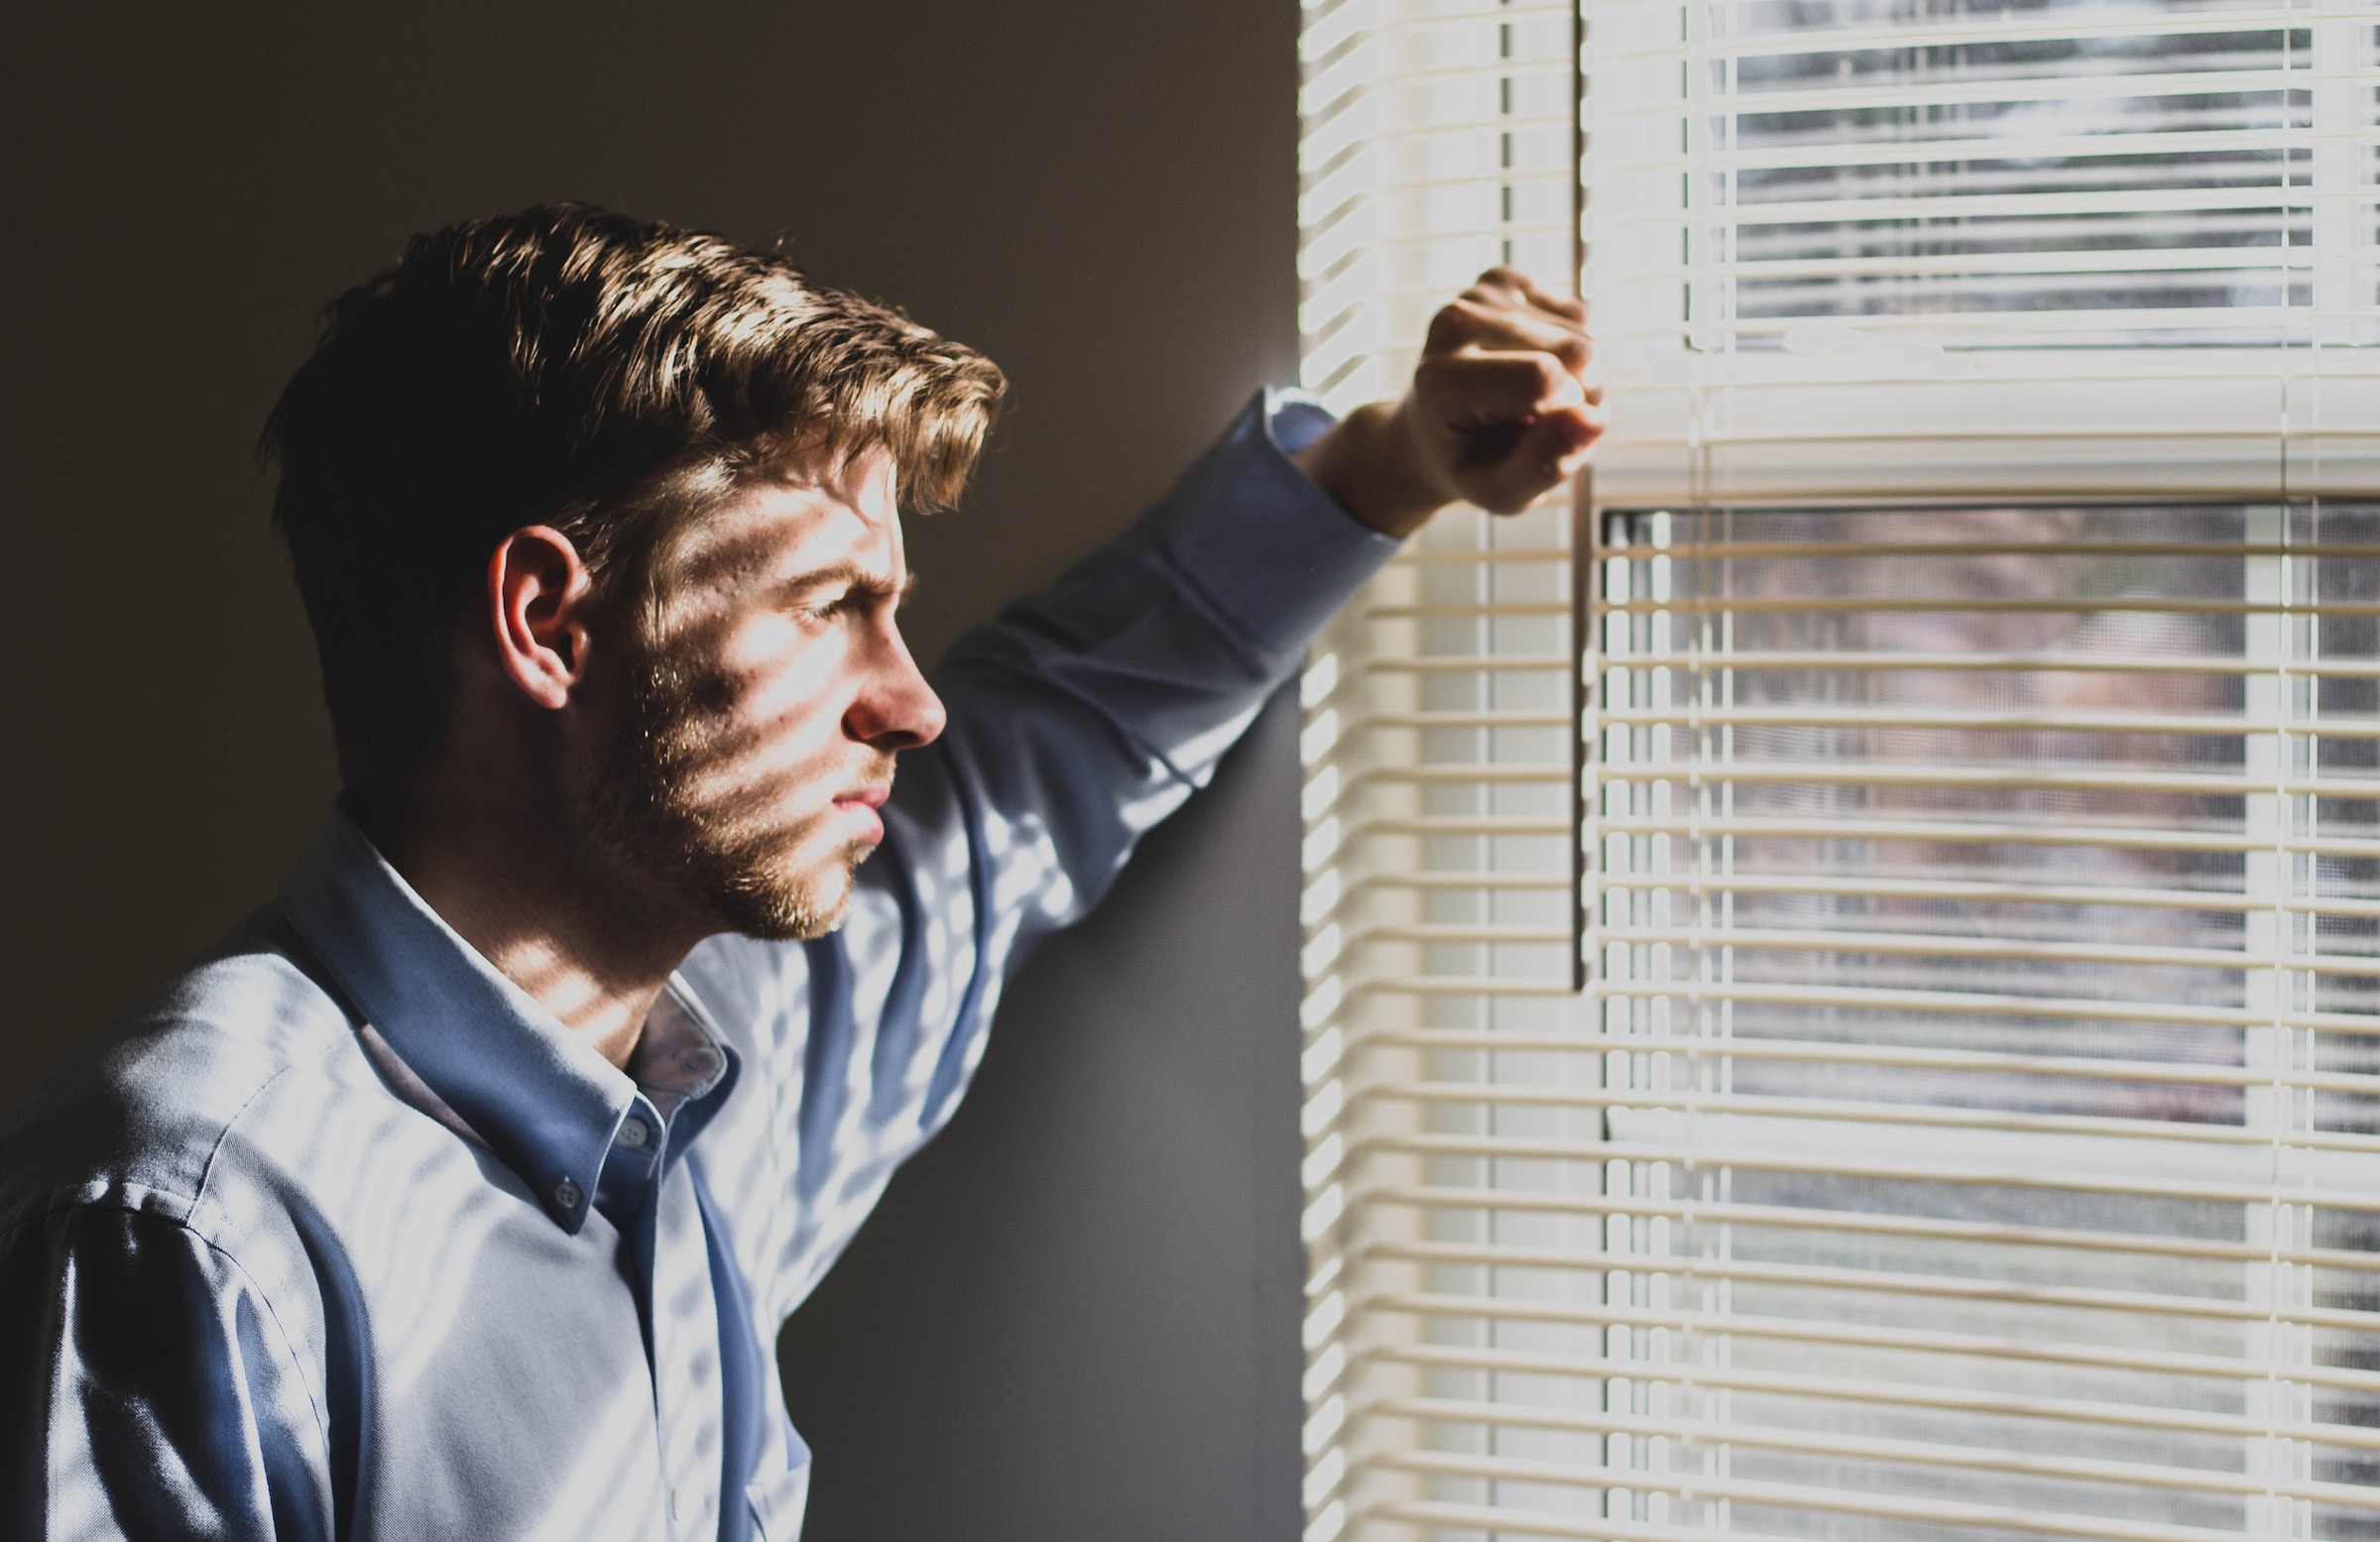 A troubled man stands near the window, looking outside and contemplating his problems | Source: Unsplash